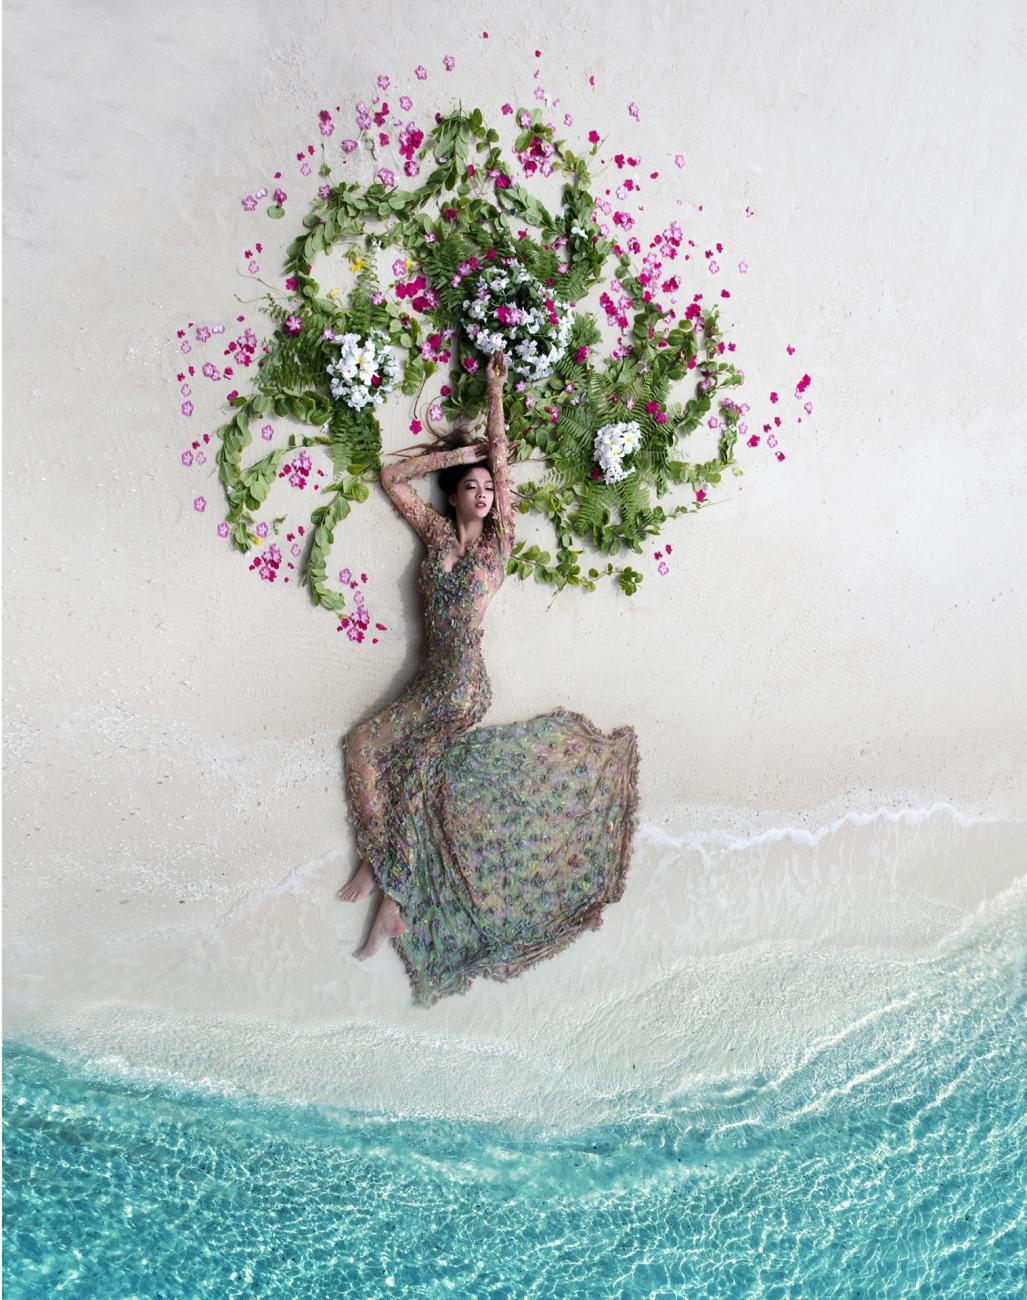 "Tropical Bride." (Courtesy of Mohamed Azmeel/<a href="https://www.facebook.com/sipacontest/">Siena Drone Photo Awards 2020</a>)